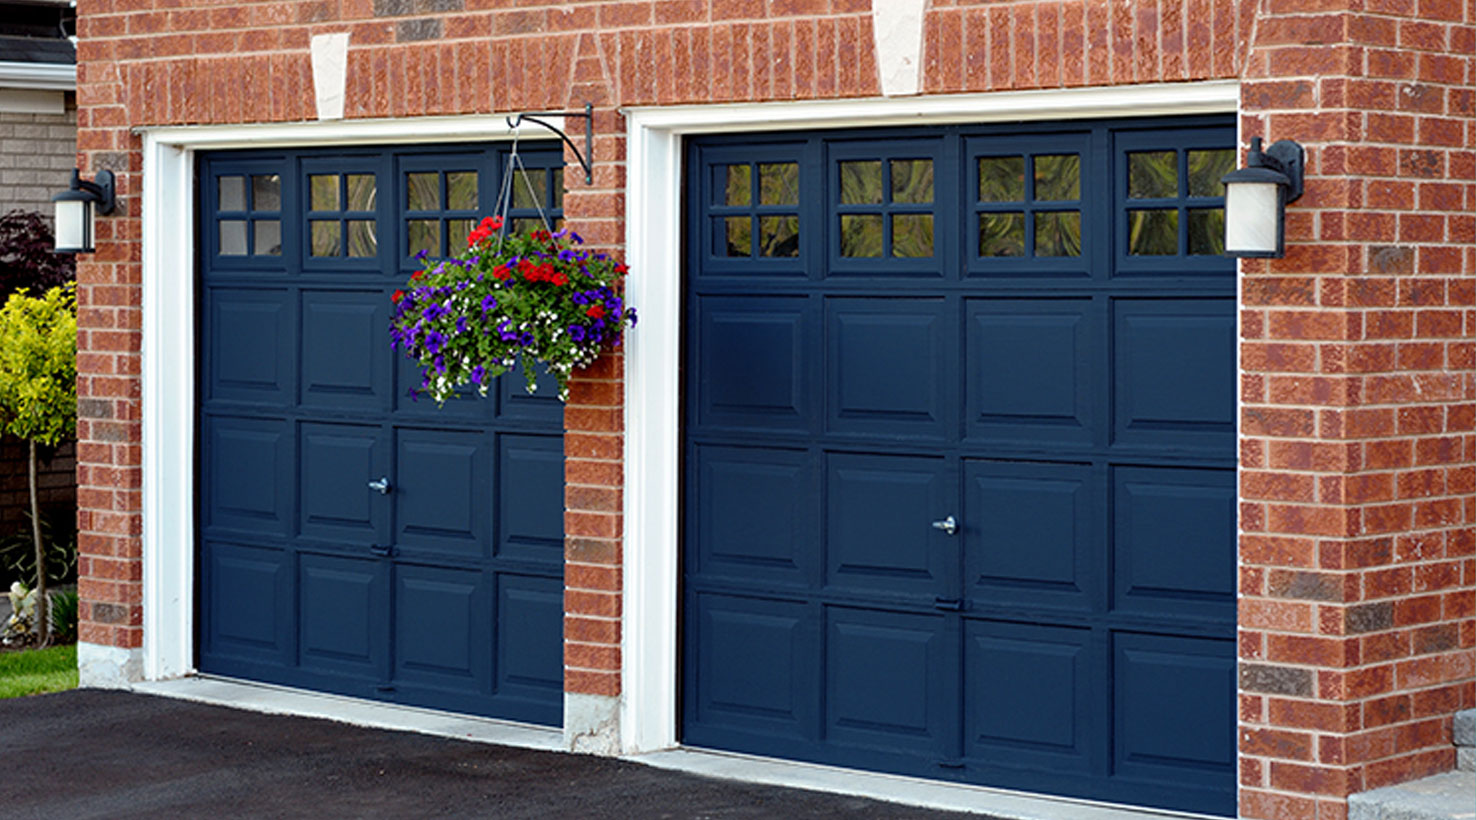 Painting The Garage Door Can Make A Huge Difference